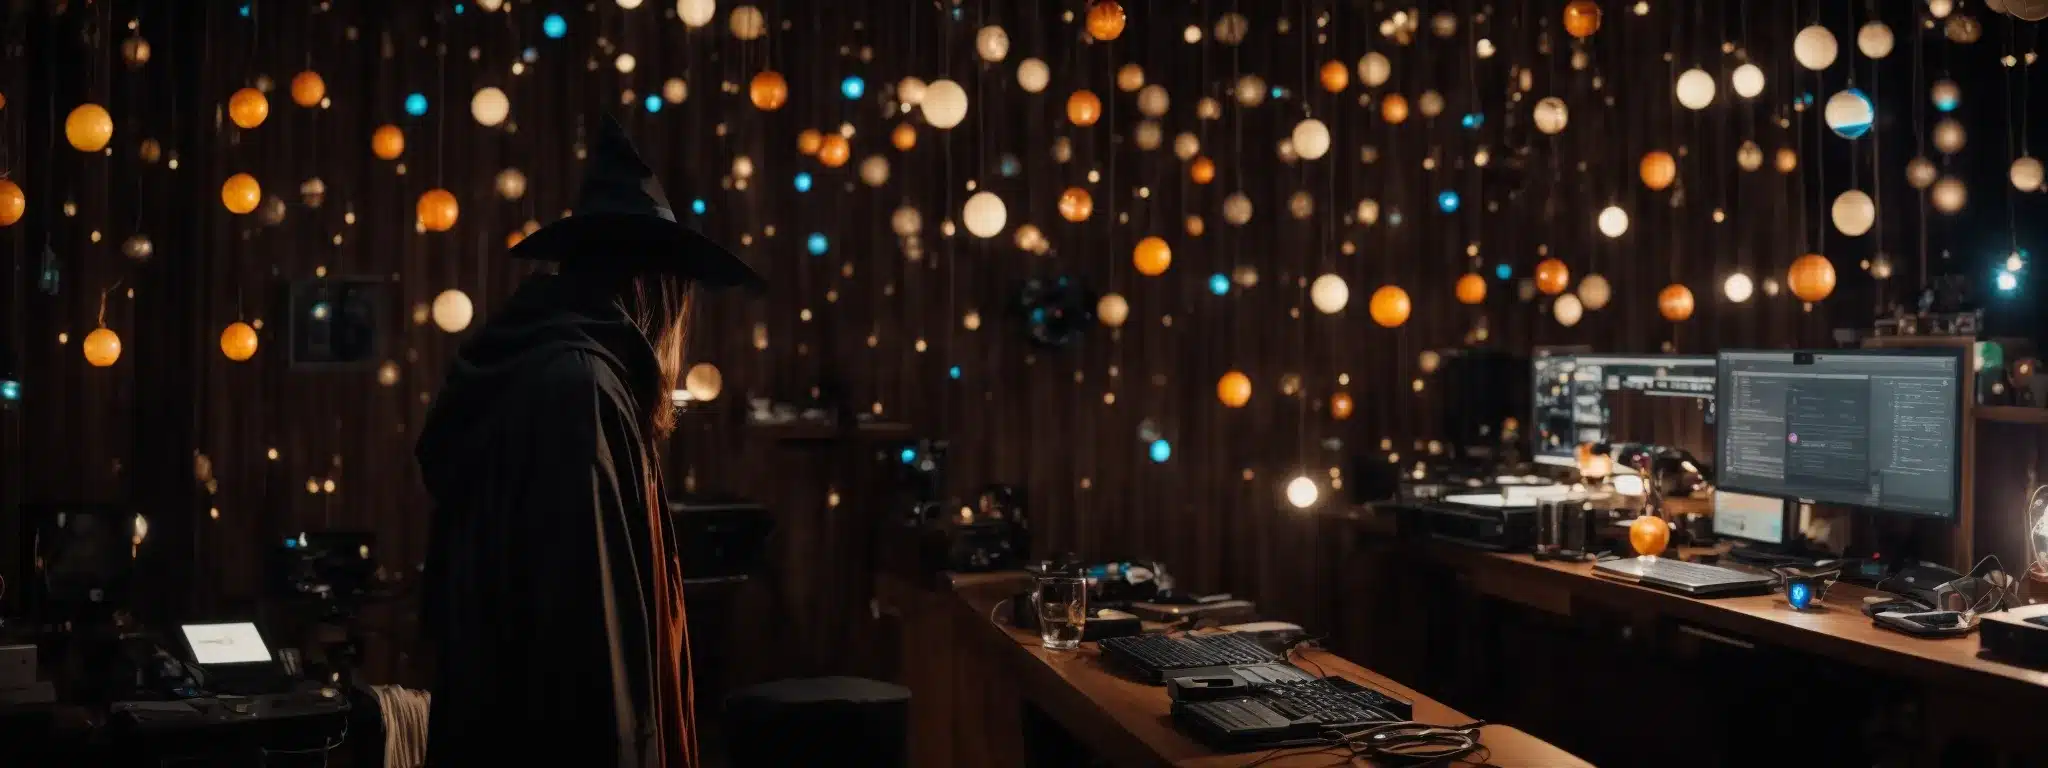 A Wizard Surrounded By Mystical Orbs Representing Plugins As They Carefully Select And Arrange Them Around A Glowing Computer Screen.